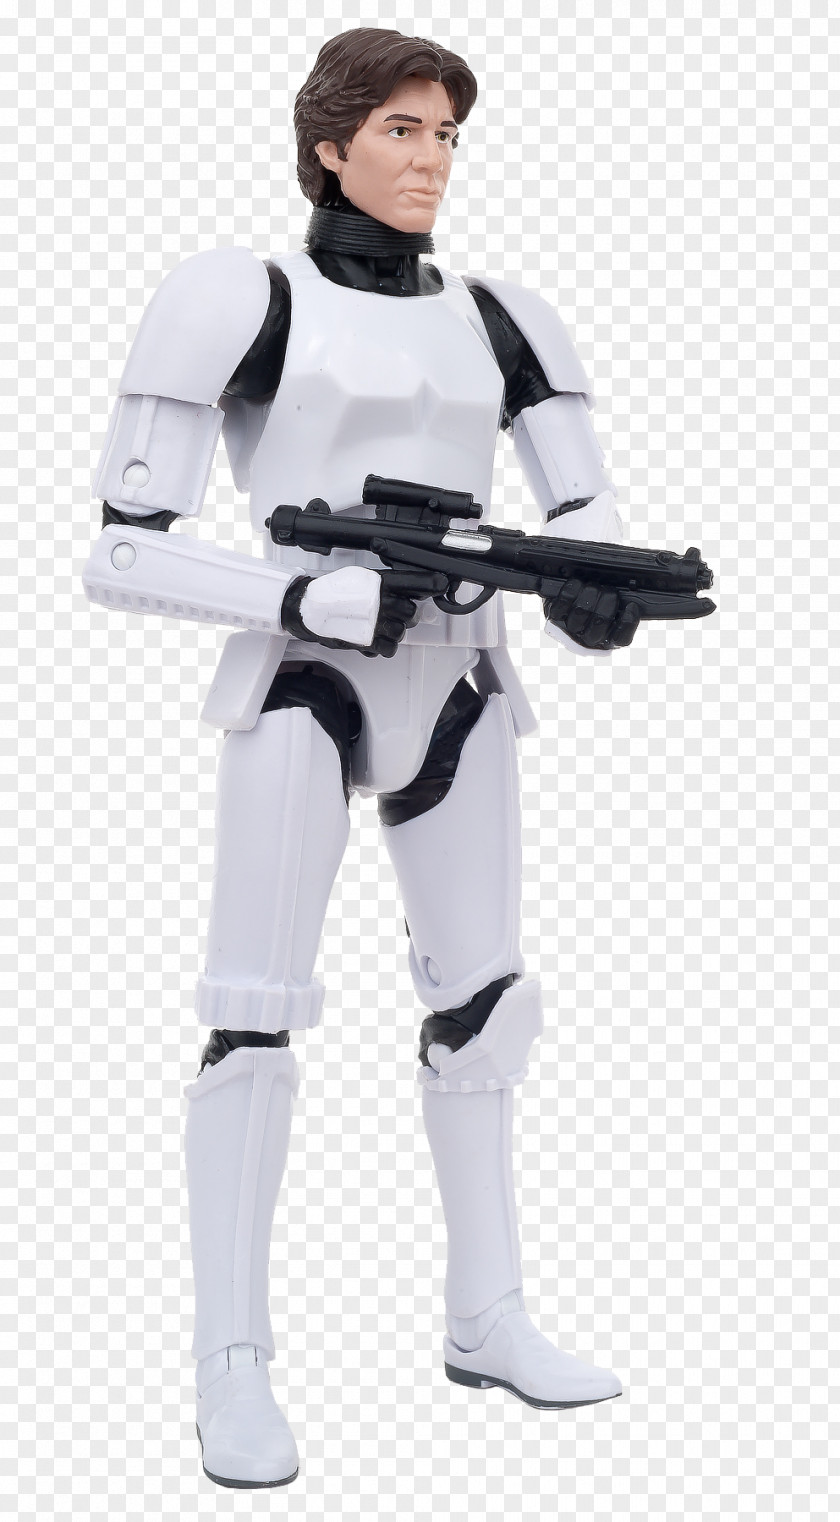 Stormtrooper Han Solo Solo: A Star Wars Story Action & Toy Figures PNG